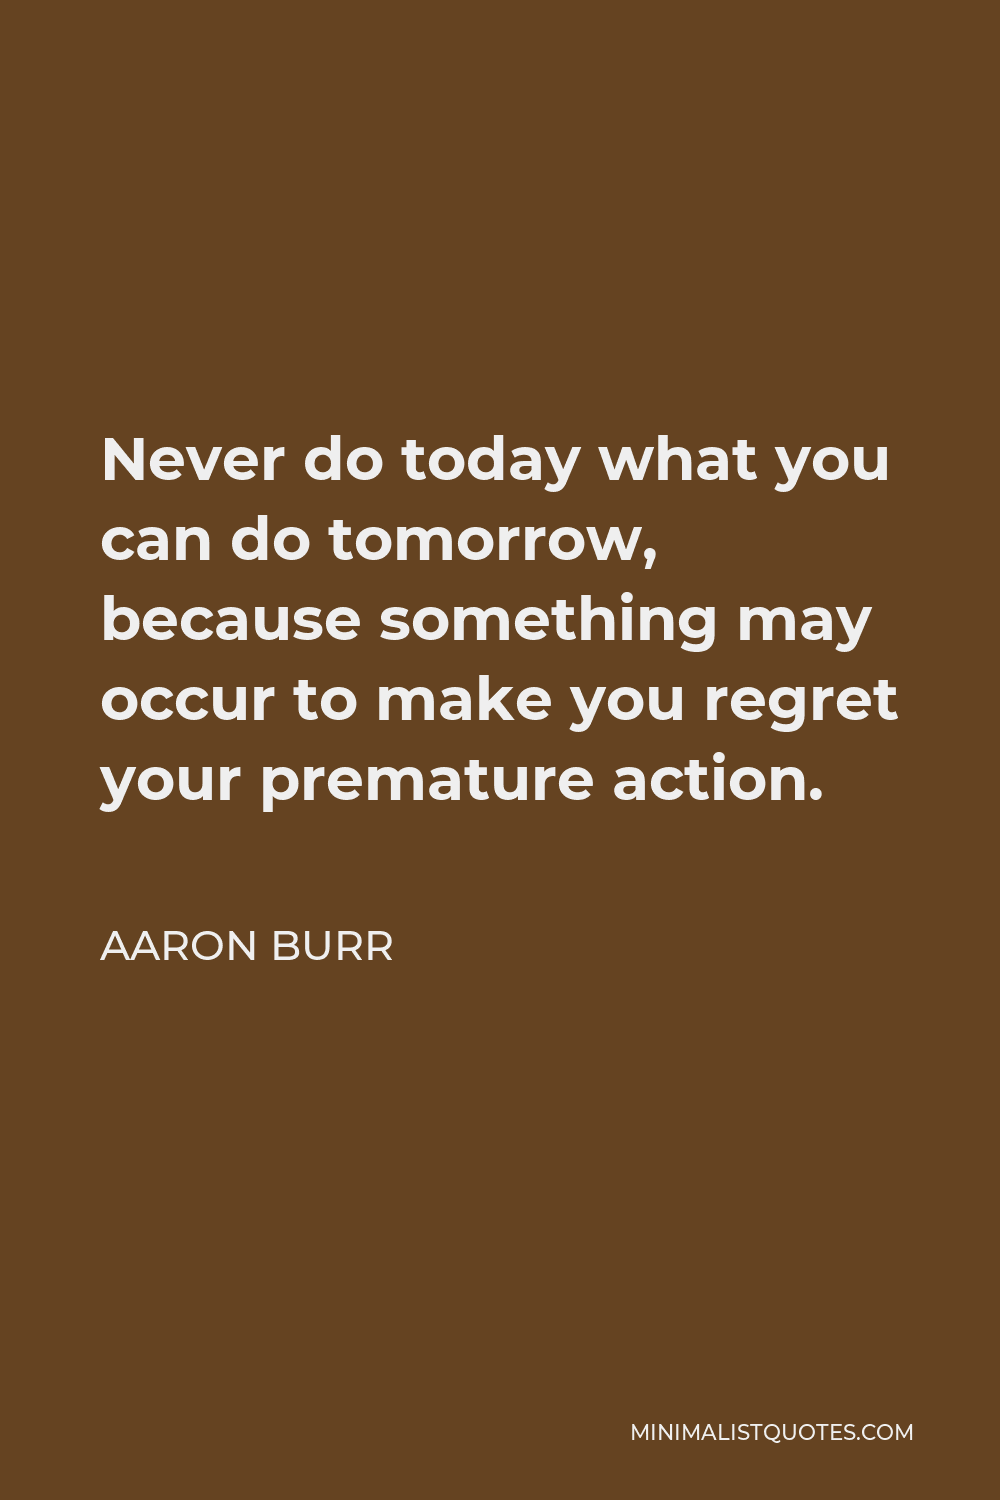 Aaron Burr Quote: Never do today what you can do tomorrow, because ...